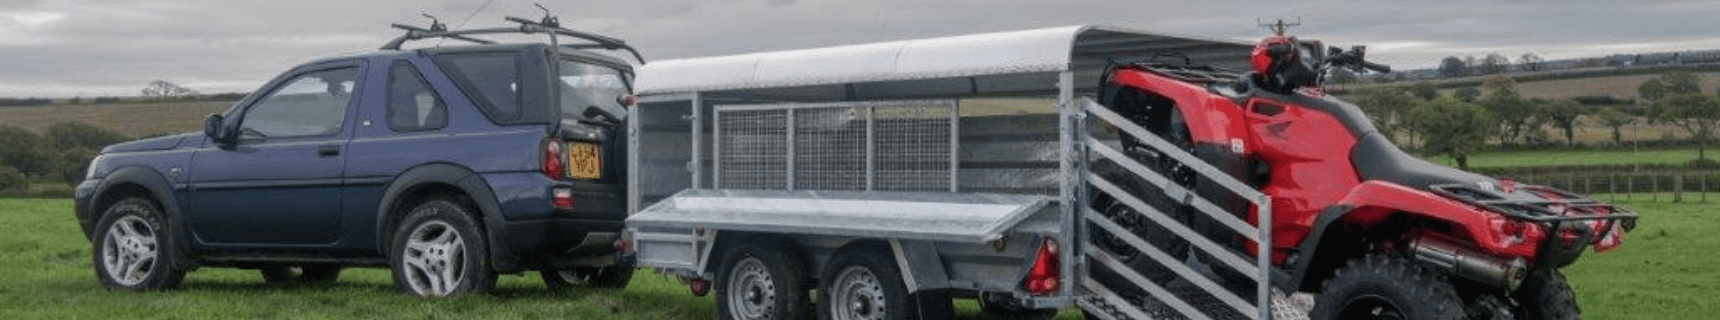 CLH Livestock Canopy Trailer- Unbraked Head Image